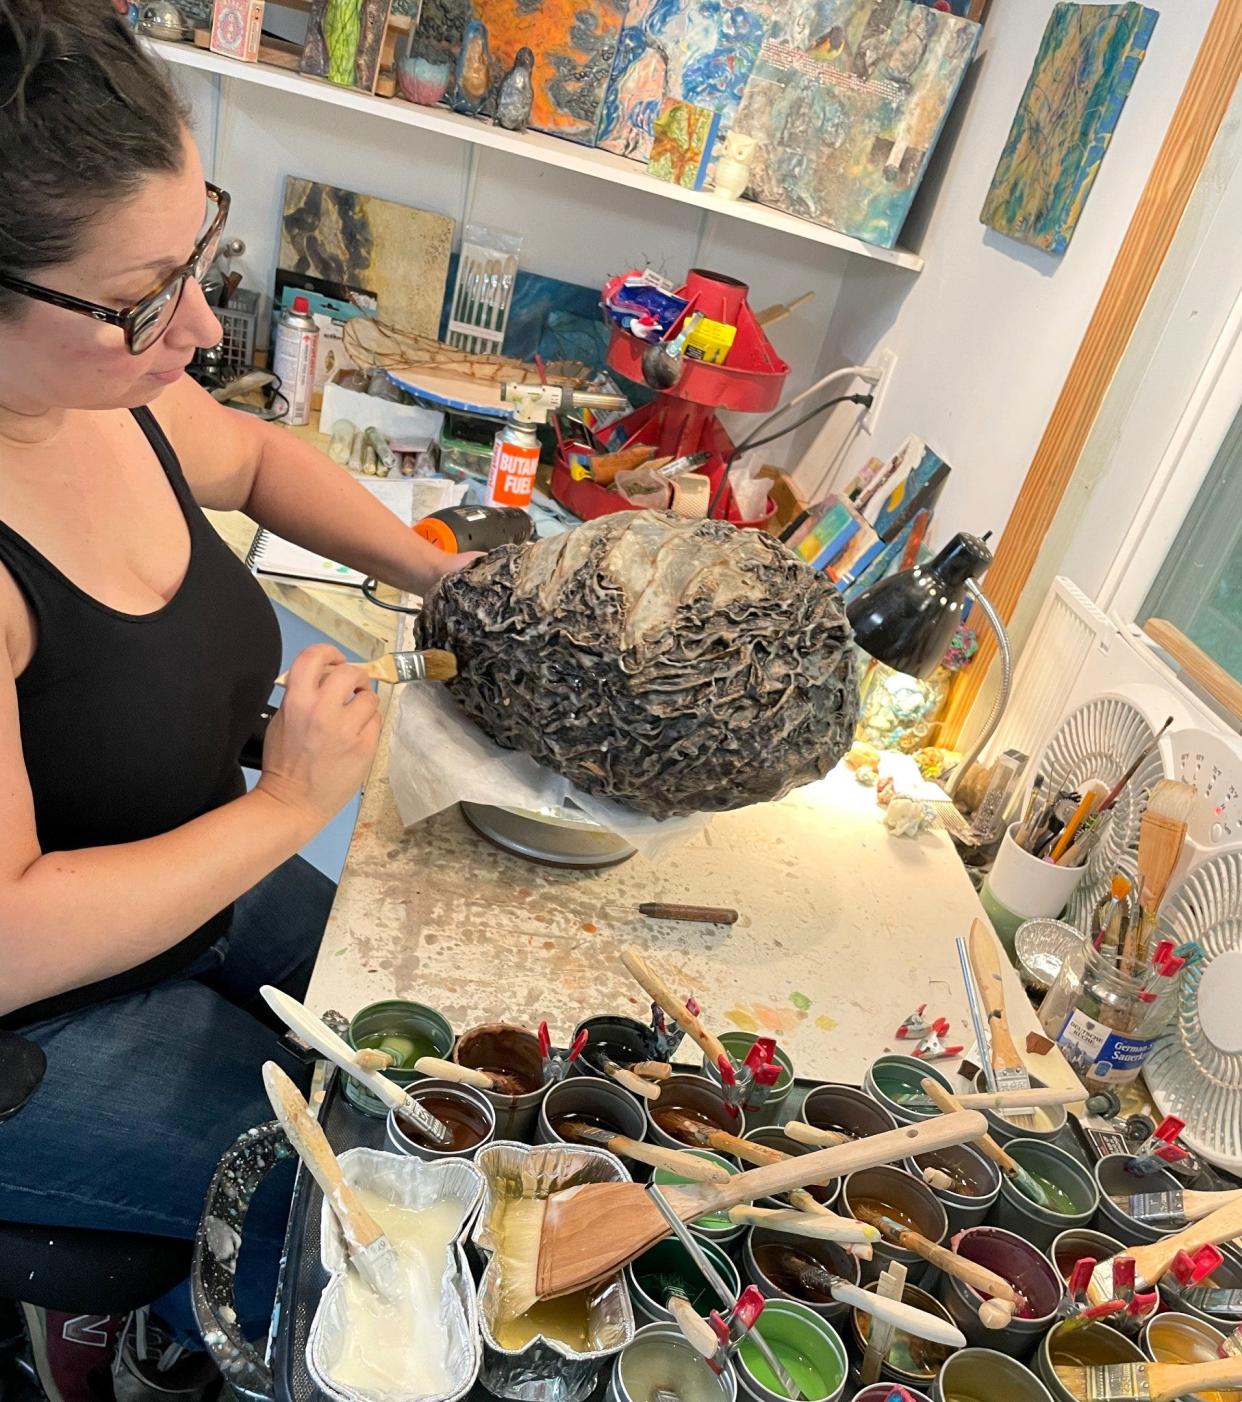 Regina Bos works on a piece. Bos was a recipient of an artist grant and has her work displayed at the Cleveland County Arts Council as part of a local artists exhibit.